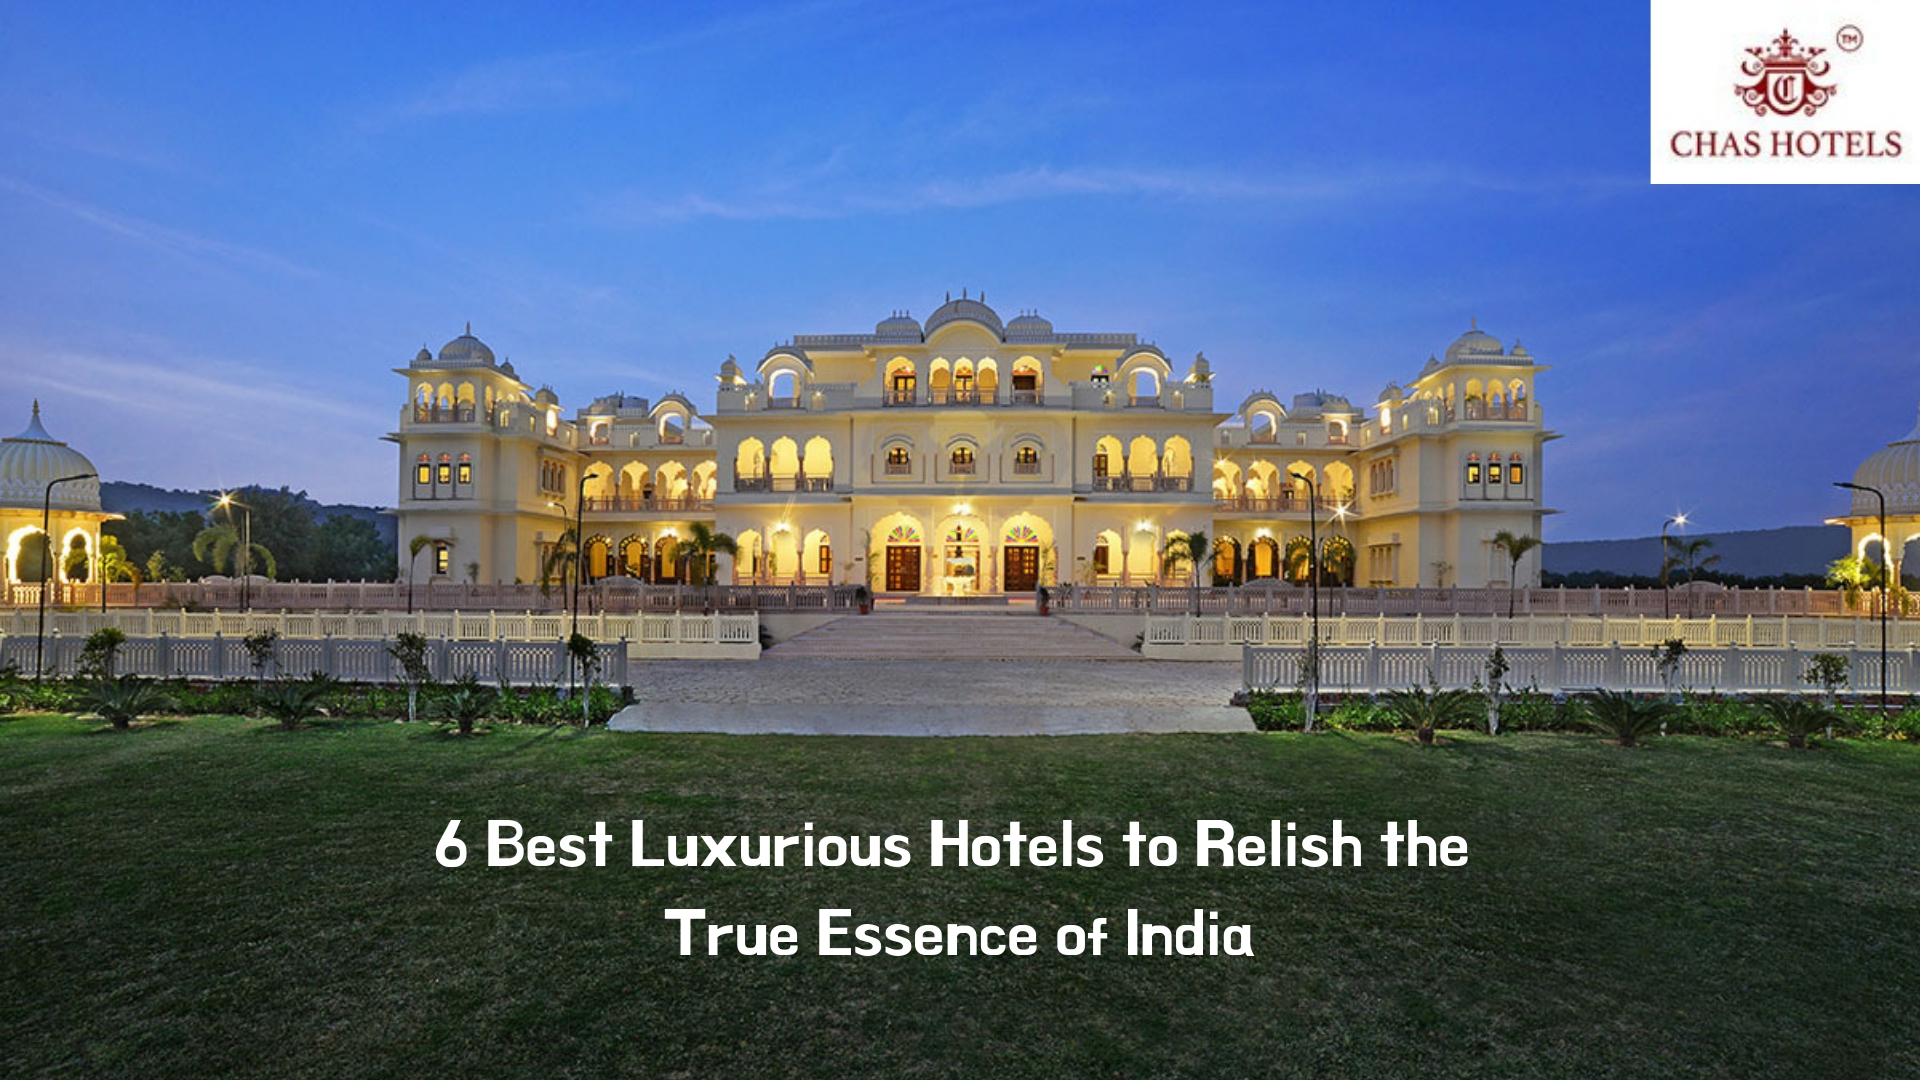 6 Best Luxurious Hotels to Relish the True Essence of India